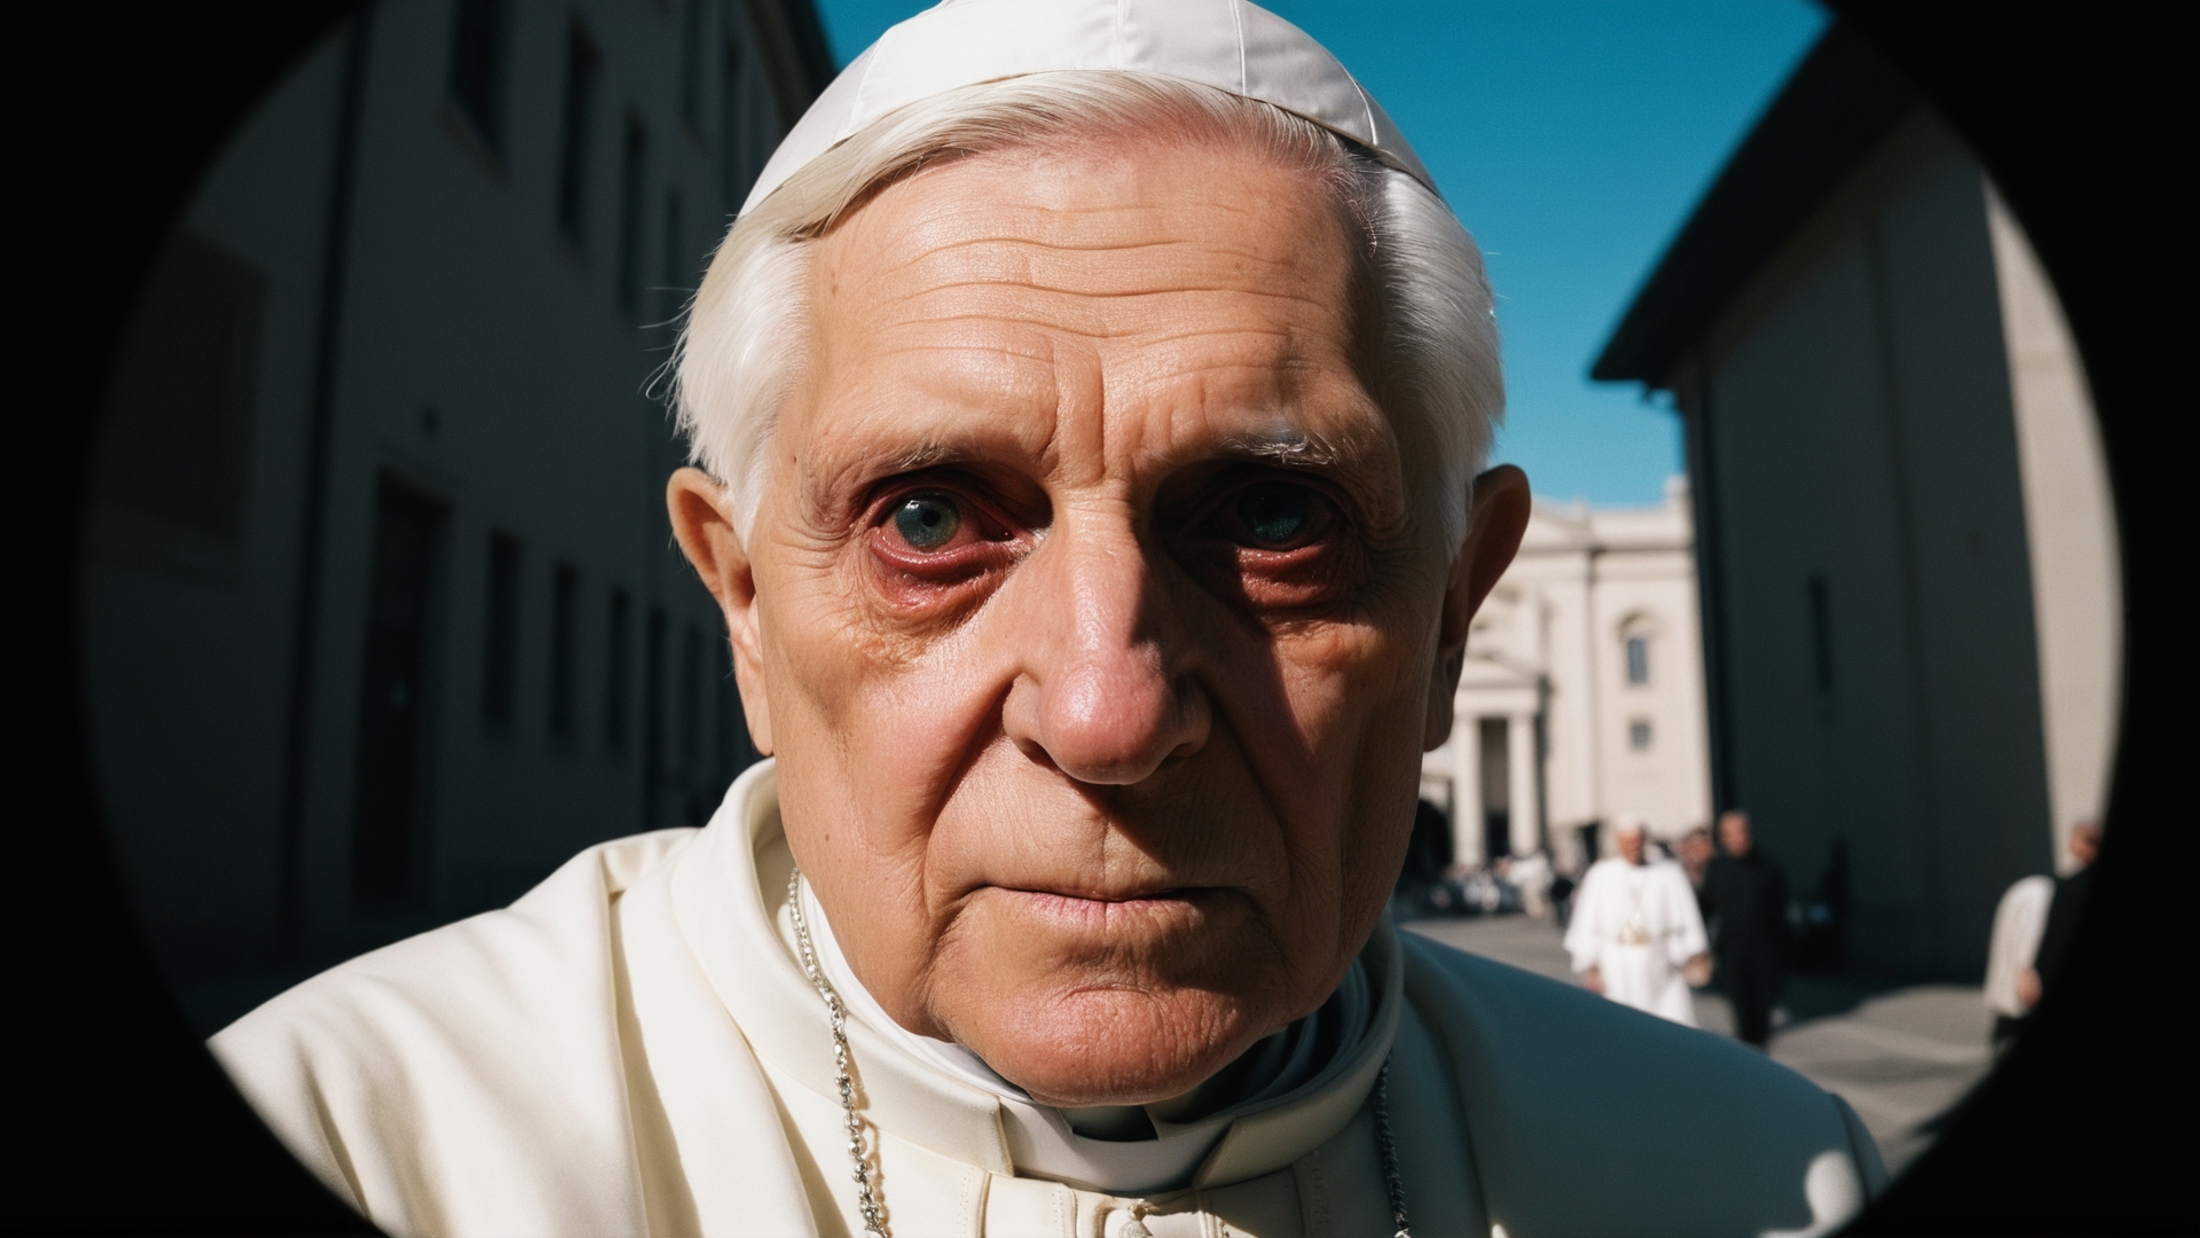 Pope Francis Staring with Red Eyes in Black and White Photograph